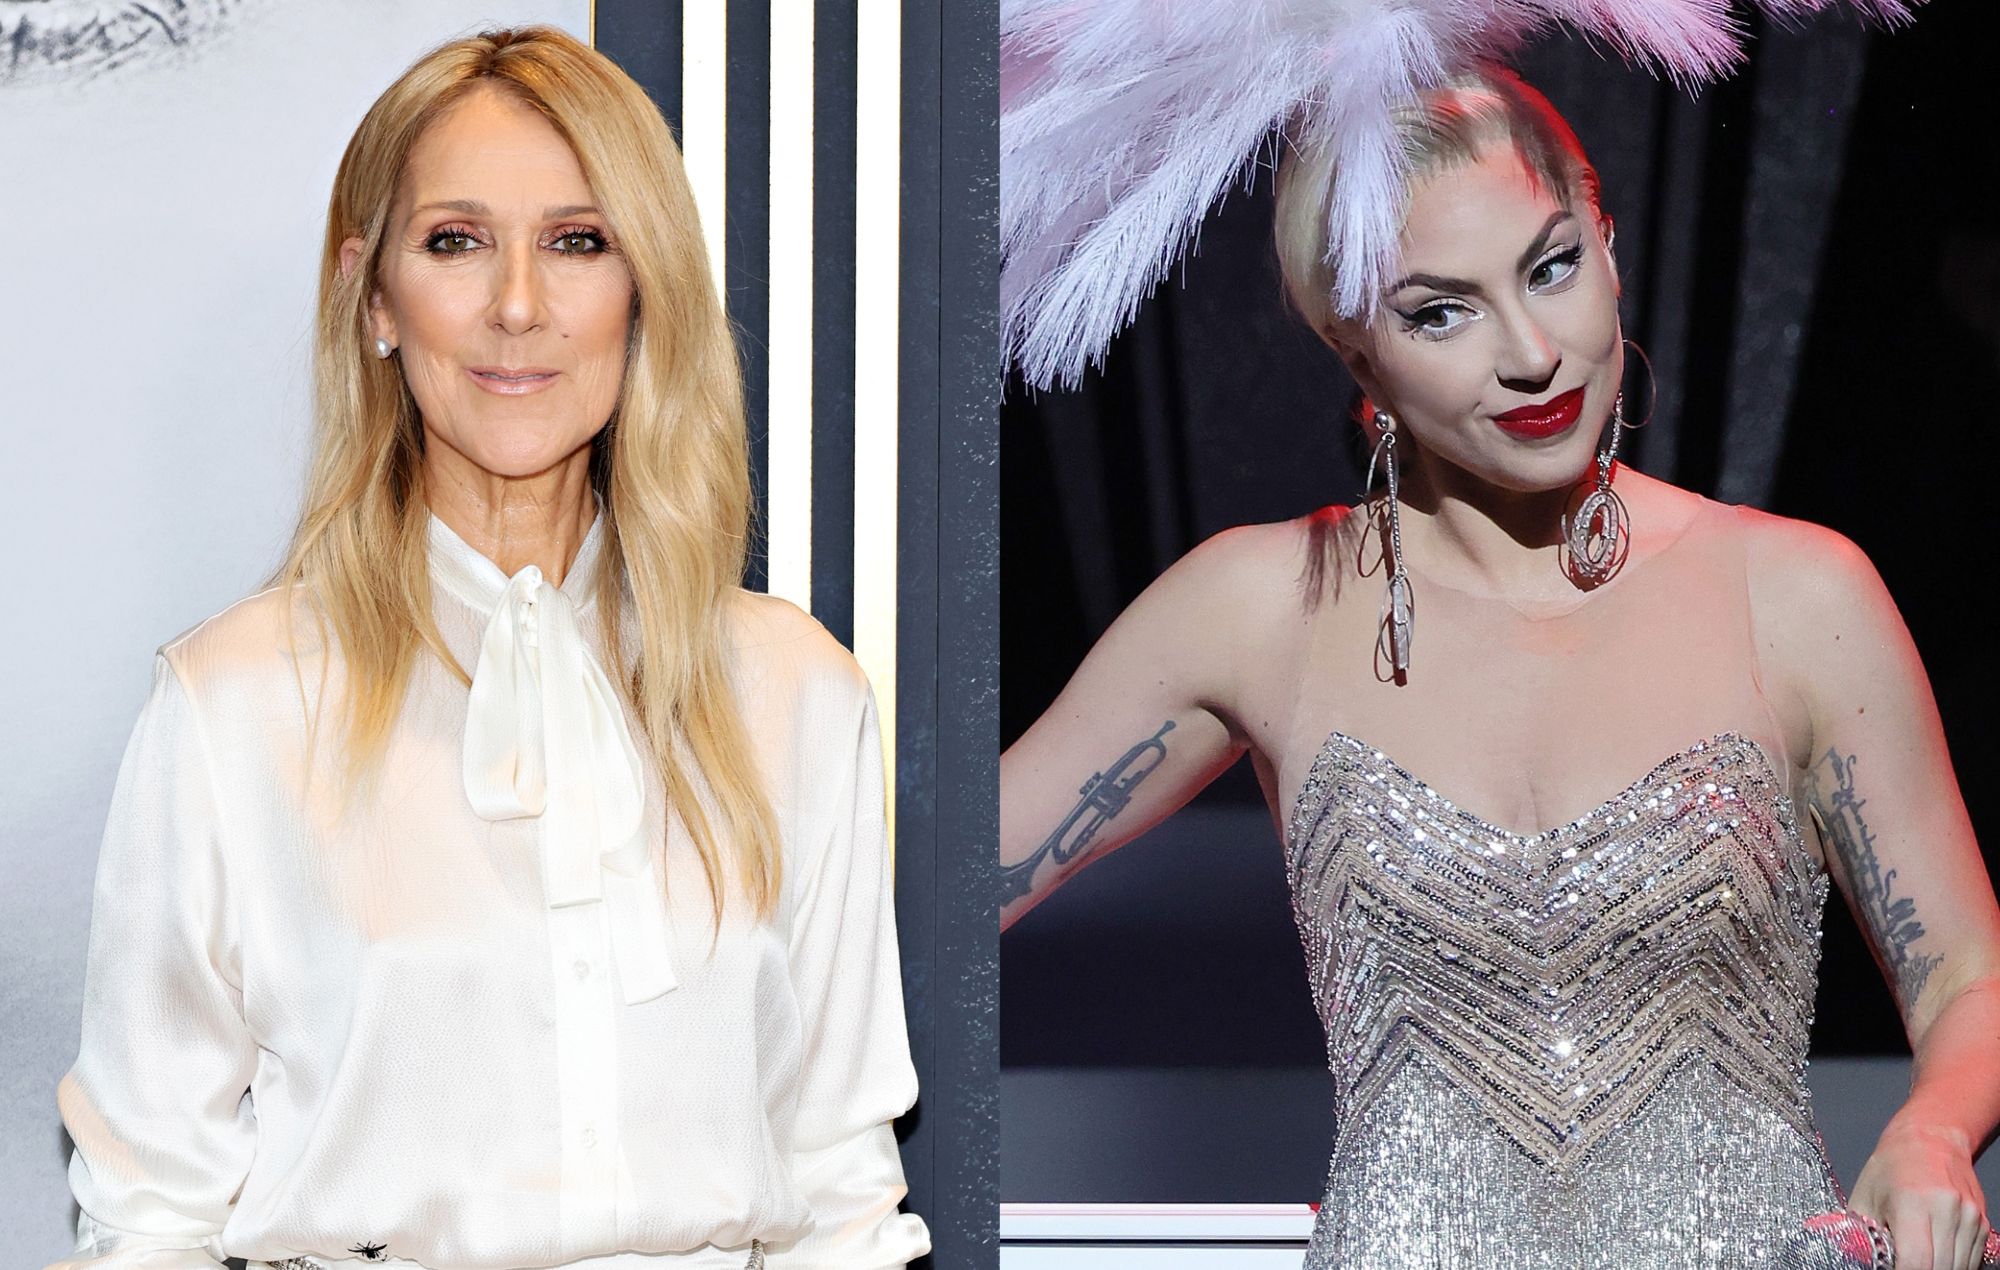 Paris Olympics 2024: Lady Gaga and Celine Dion confirmed to perform duet at opening ceremony